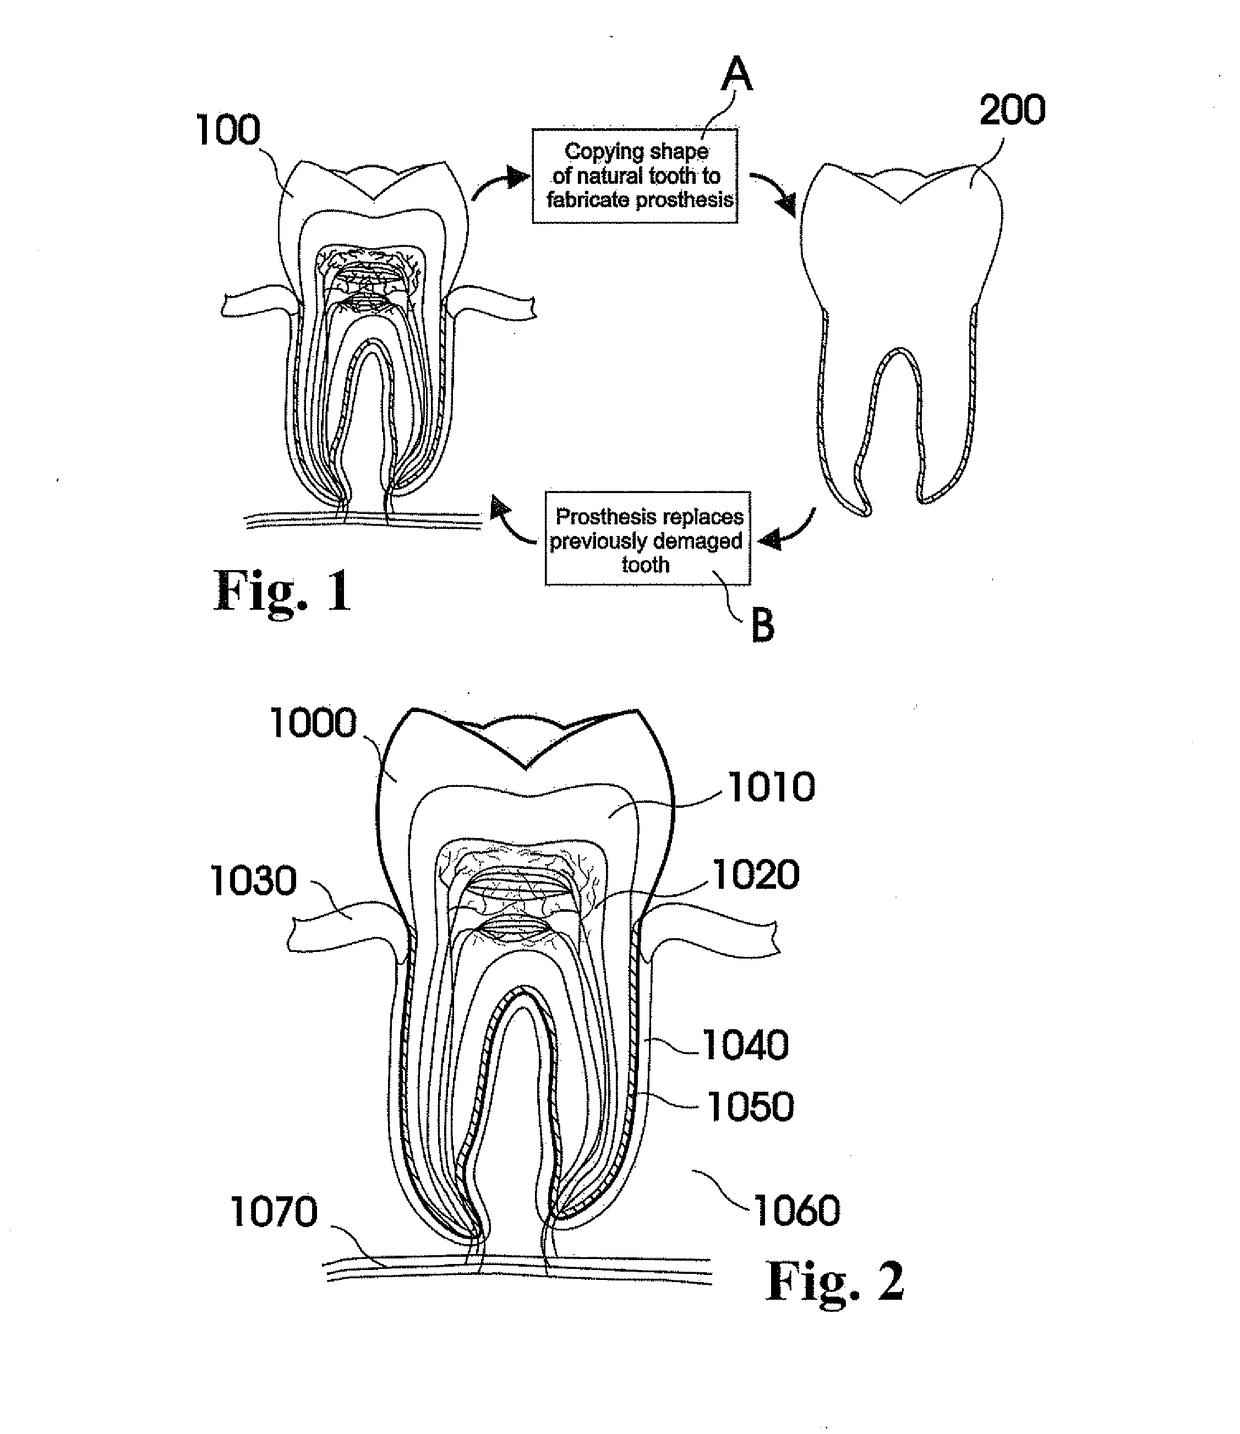 Methods of Designing and Manufacturing Customized Dental Prosthesis For Periodontal or Osseointegration and Related Systems